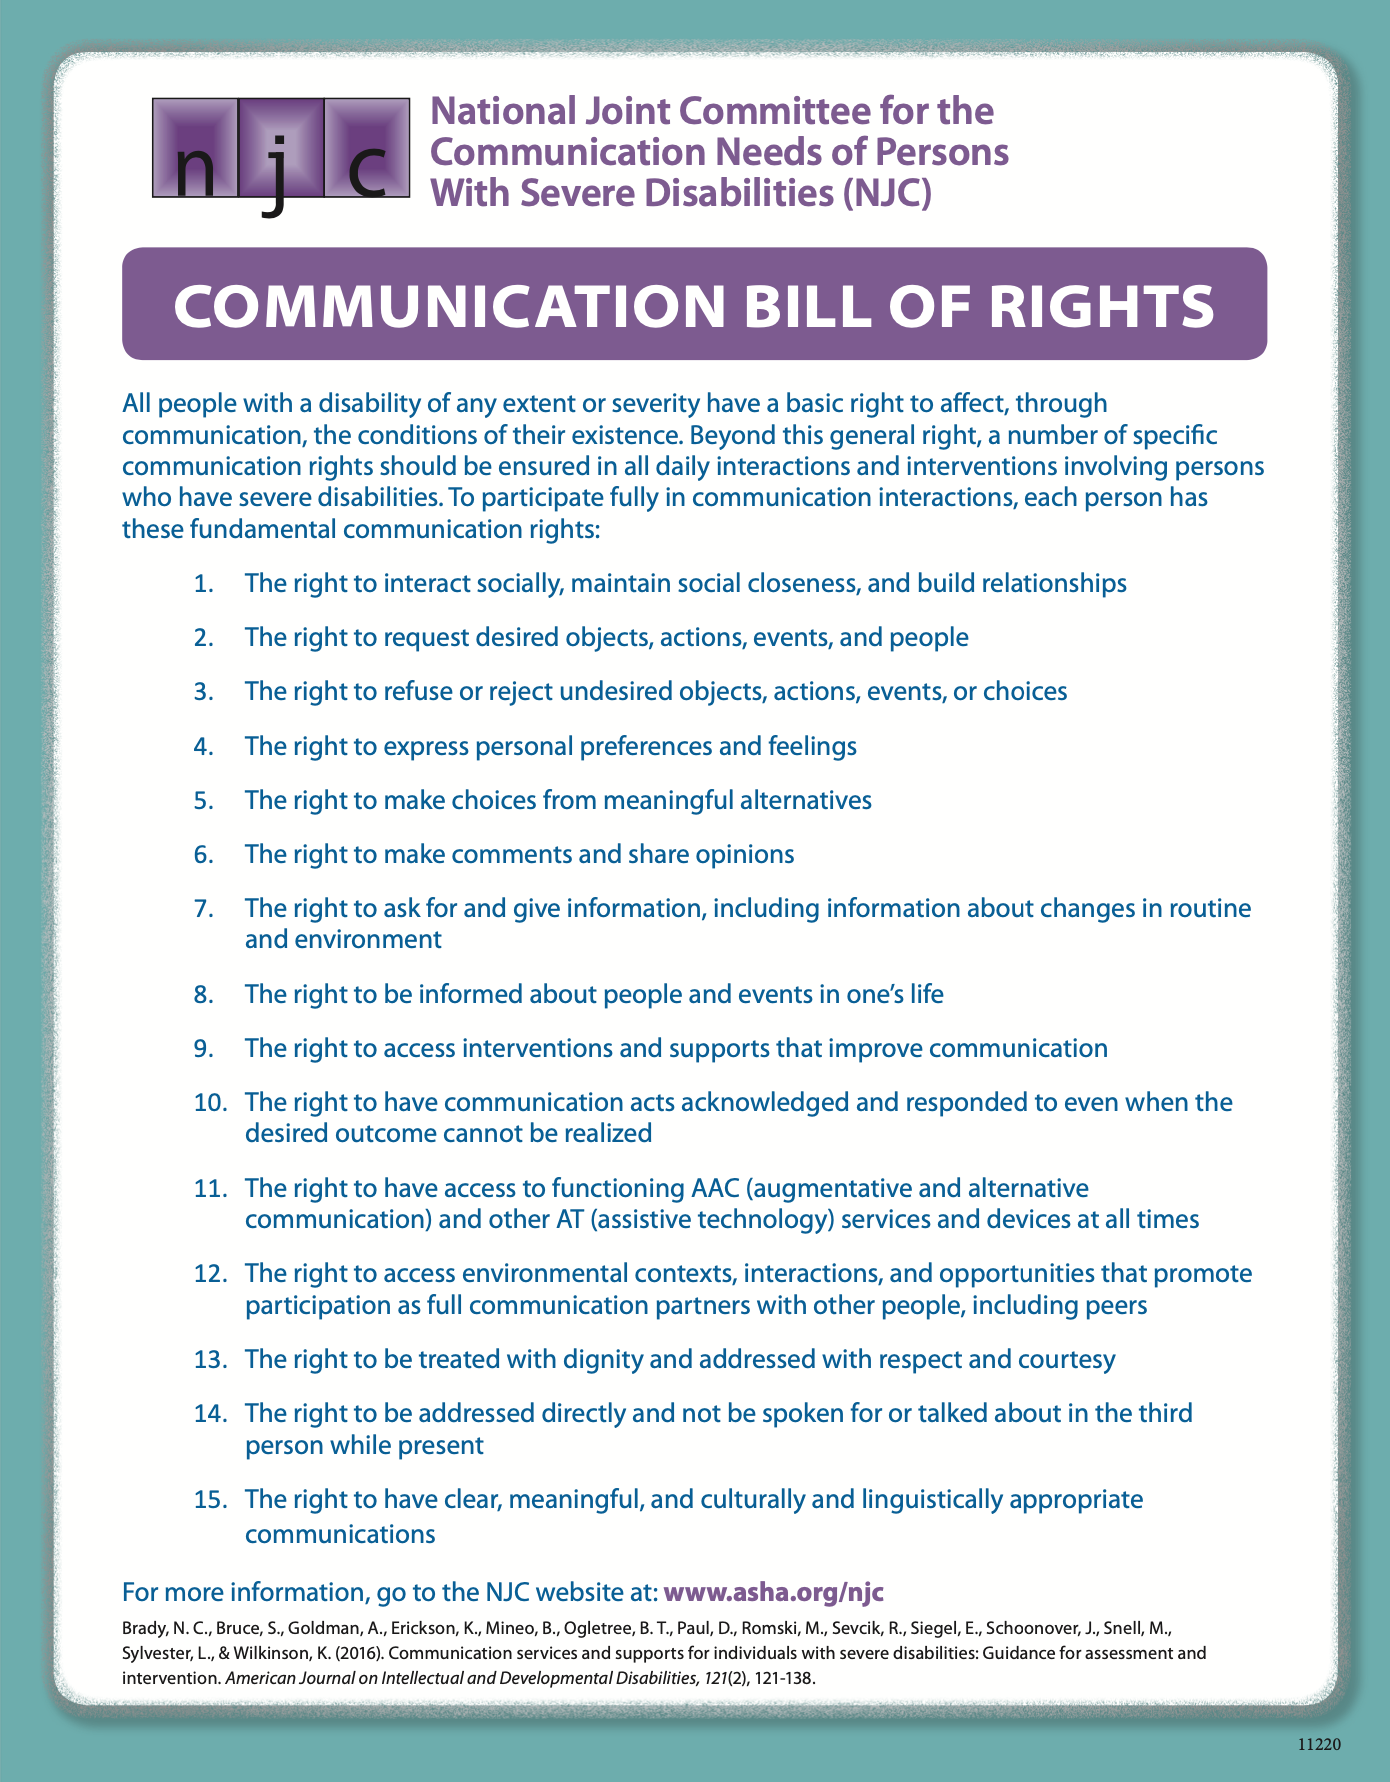 NJC communication bill of rights.png